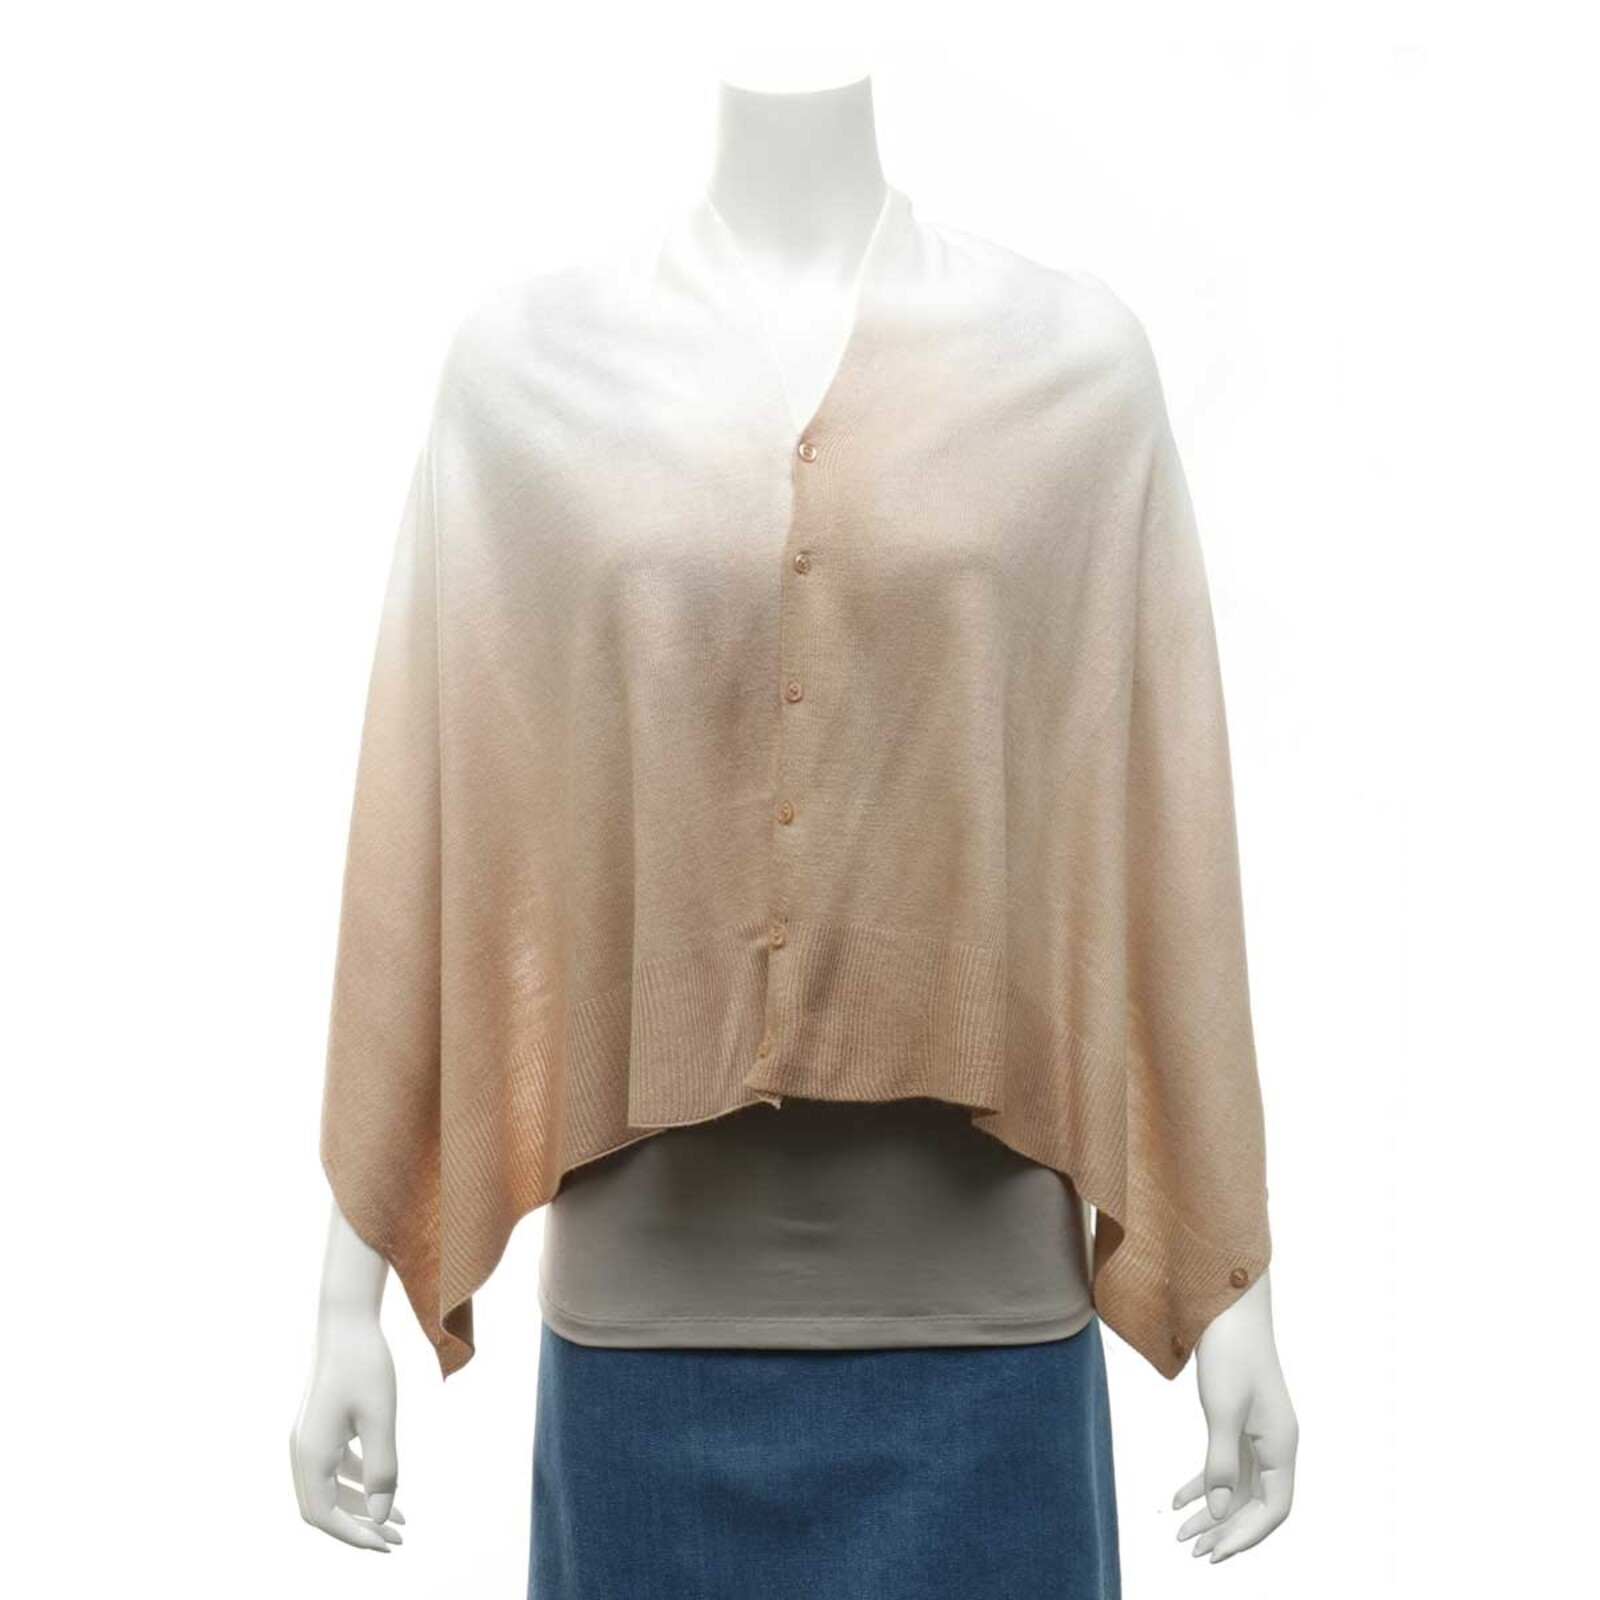 Trezo Cream Ombre Cardi-Shawl with Buttons     S5447 loading=